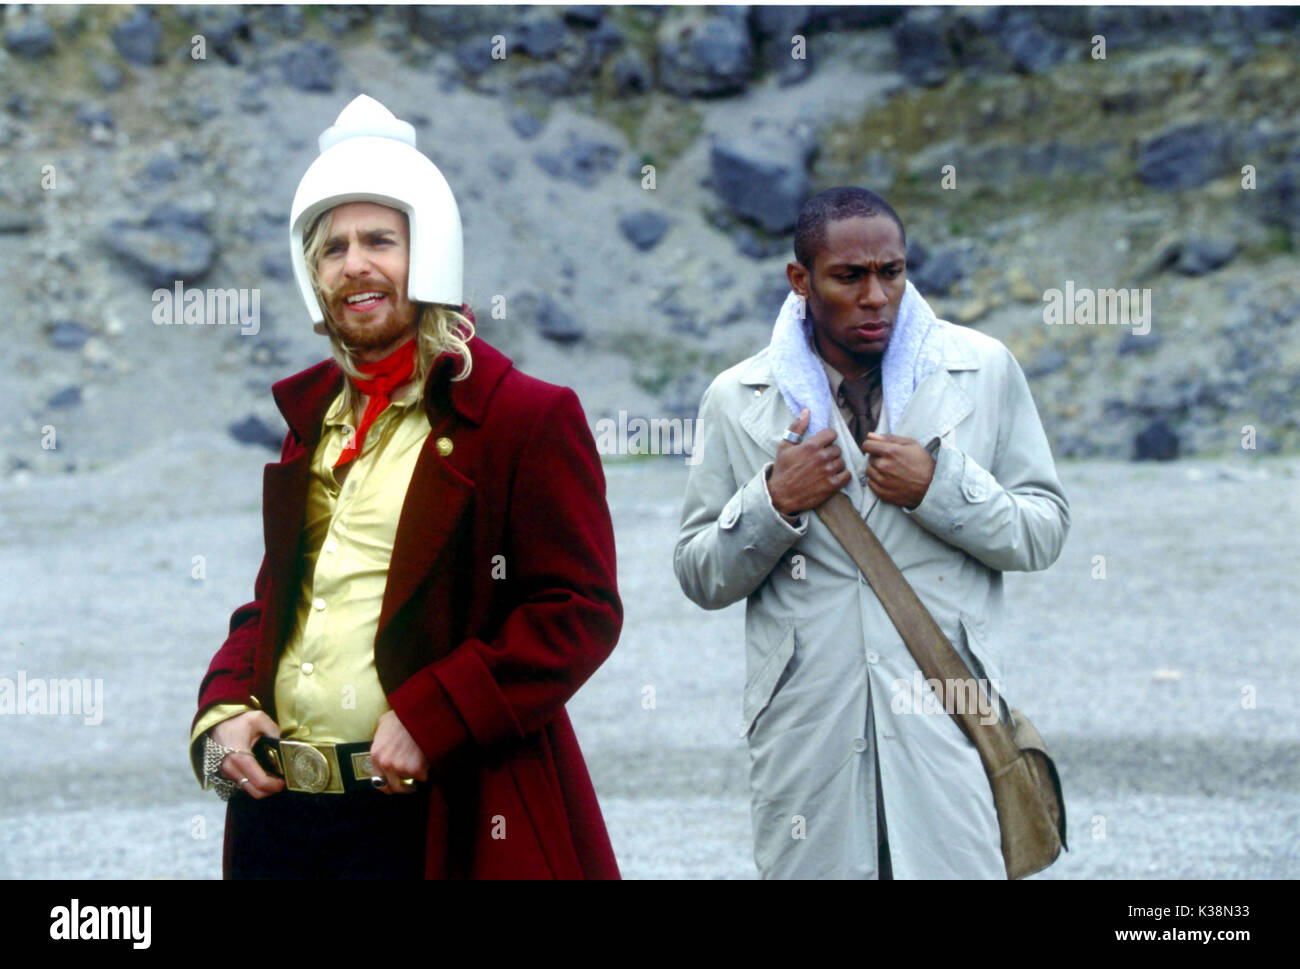 THE HITCHHIKER'S GUIDE TO THE GALAXY [US / BR 2005]  SAM ROCKWELL, as Zaphod Beeblebrox,  MOS DEF, as Ford Prefect     Date: 2005 Stock Photo